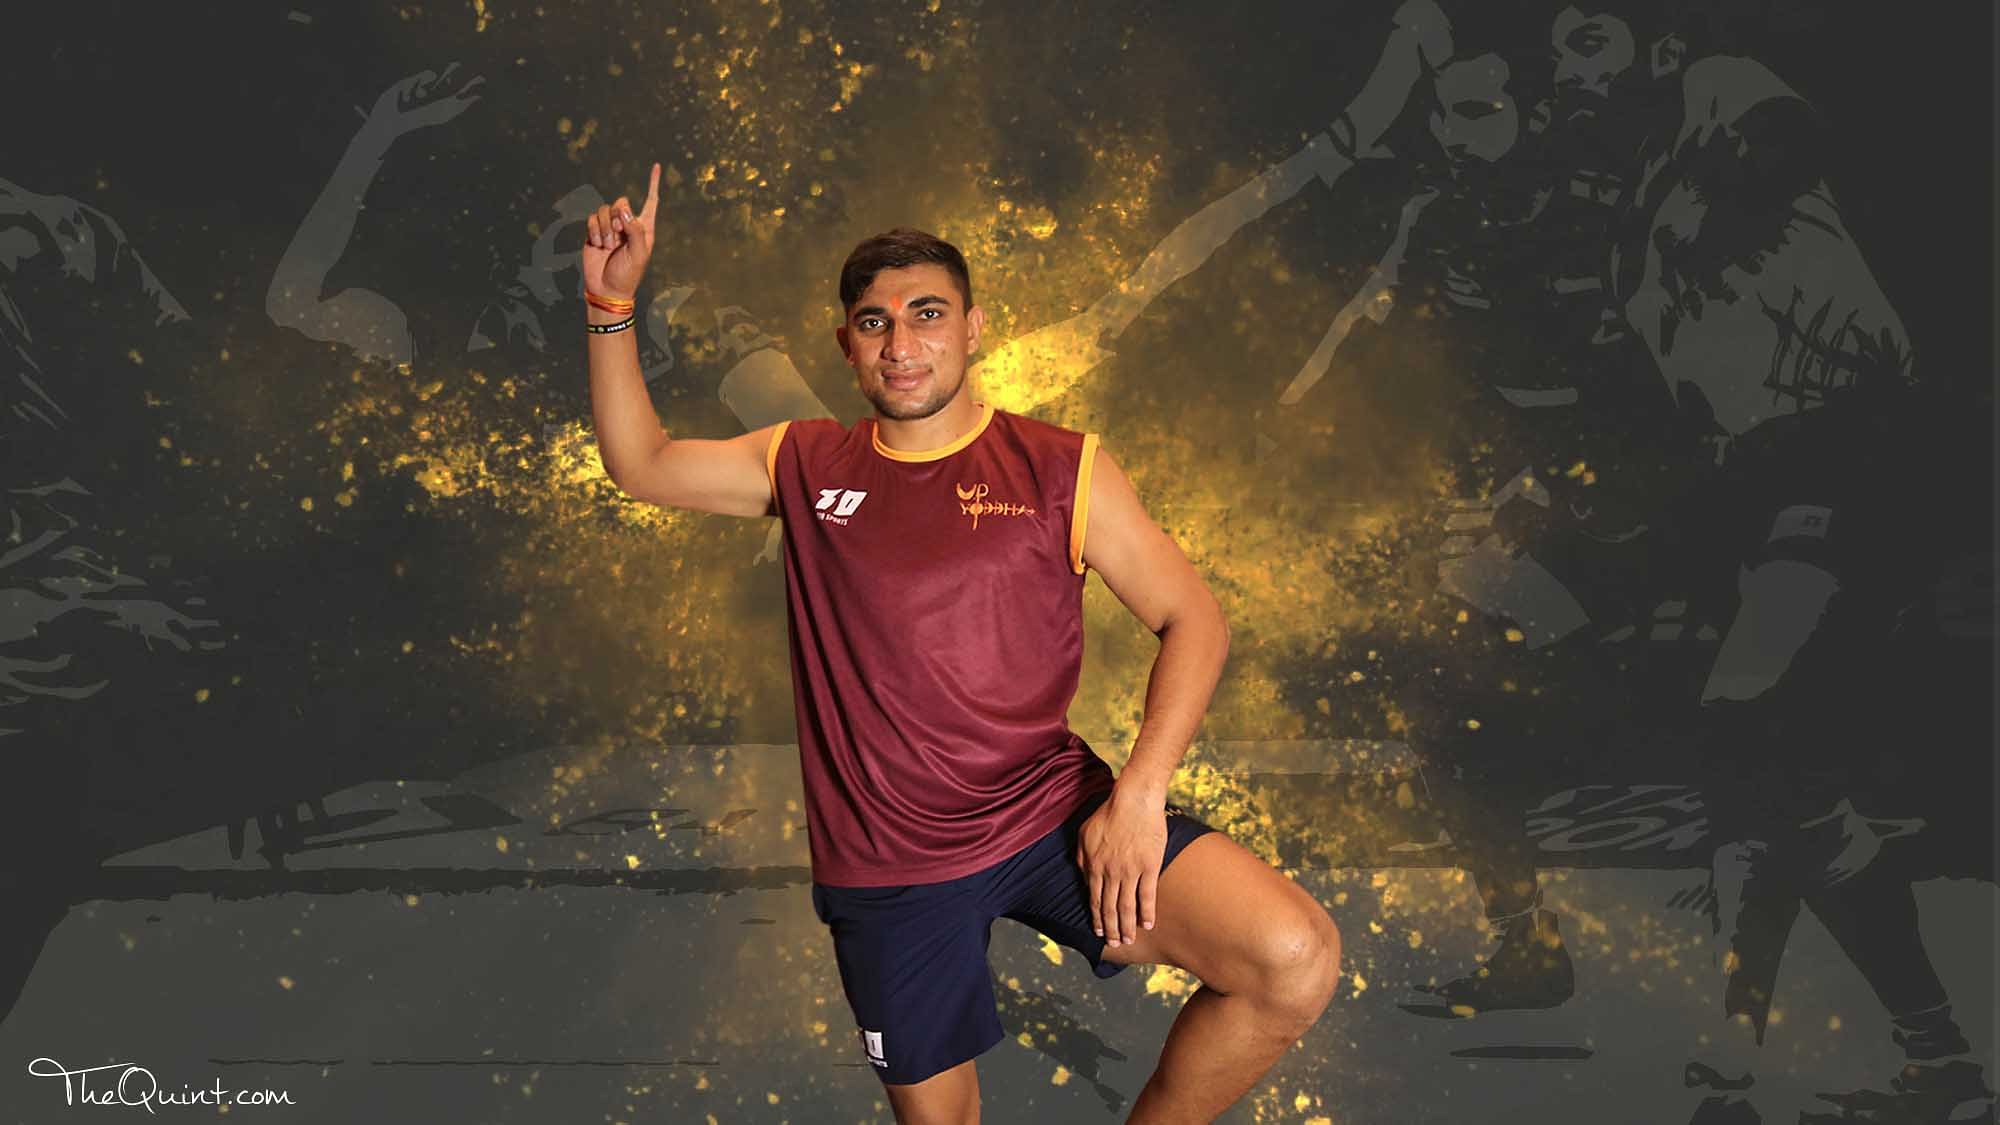 Nitin Tomar is Pro Kabaddi League’s most expensive player, bought for Rs 93 lakh by UP Yoddha.